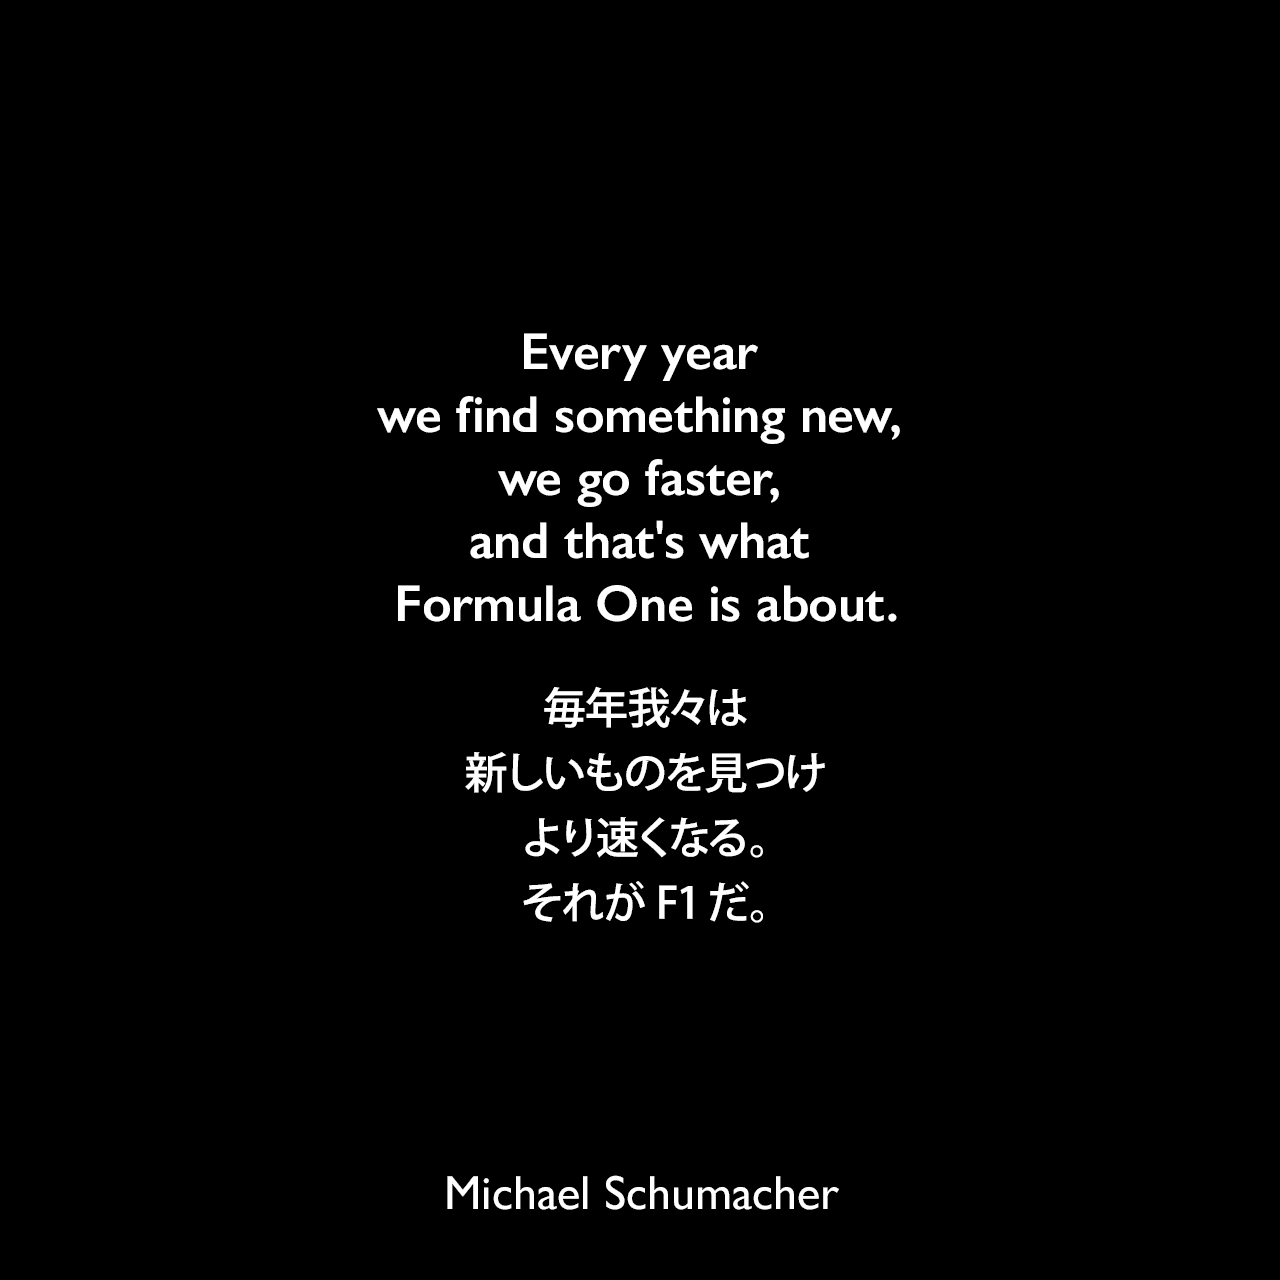 Every year we find something new, we go faster, and that's what Formula One is about.毎年我々は新しいものを見つけ、より速くなる。それがF1だ。Michael Schumacher